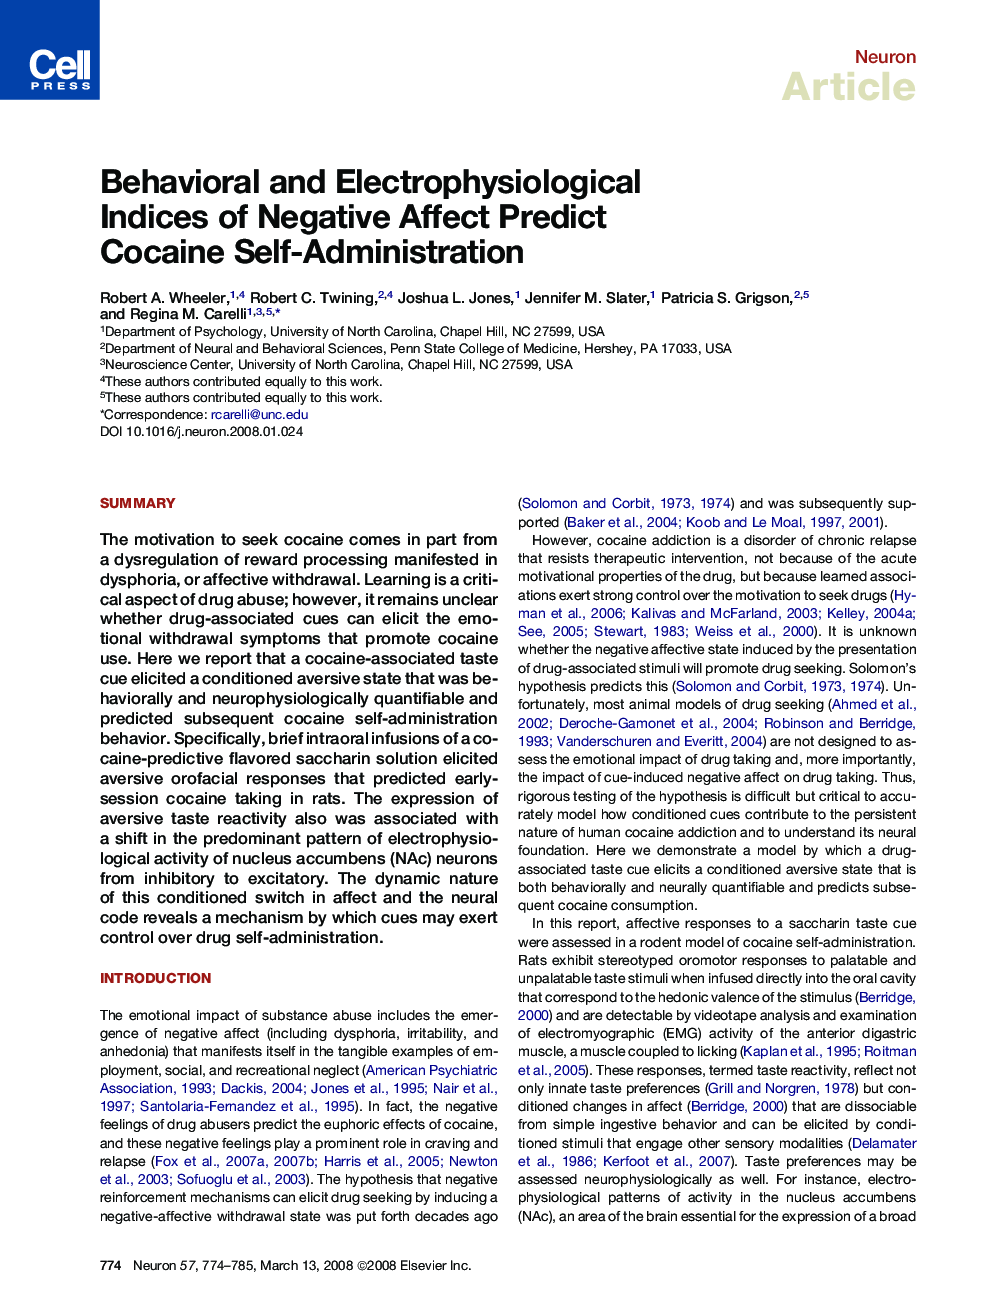 Behavioral and Electrophysiological Indices of Negative Affect Predict Cocaine Self-Administration